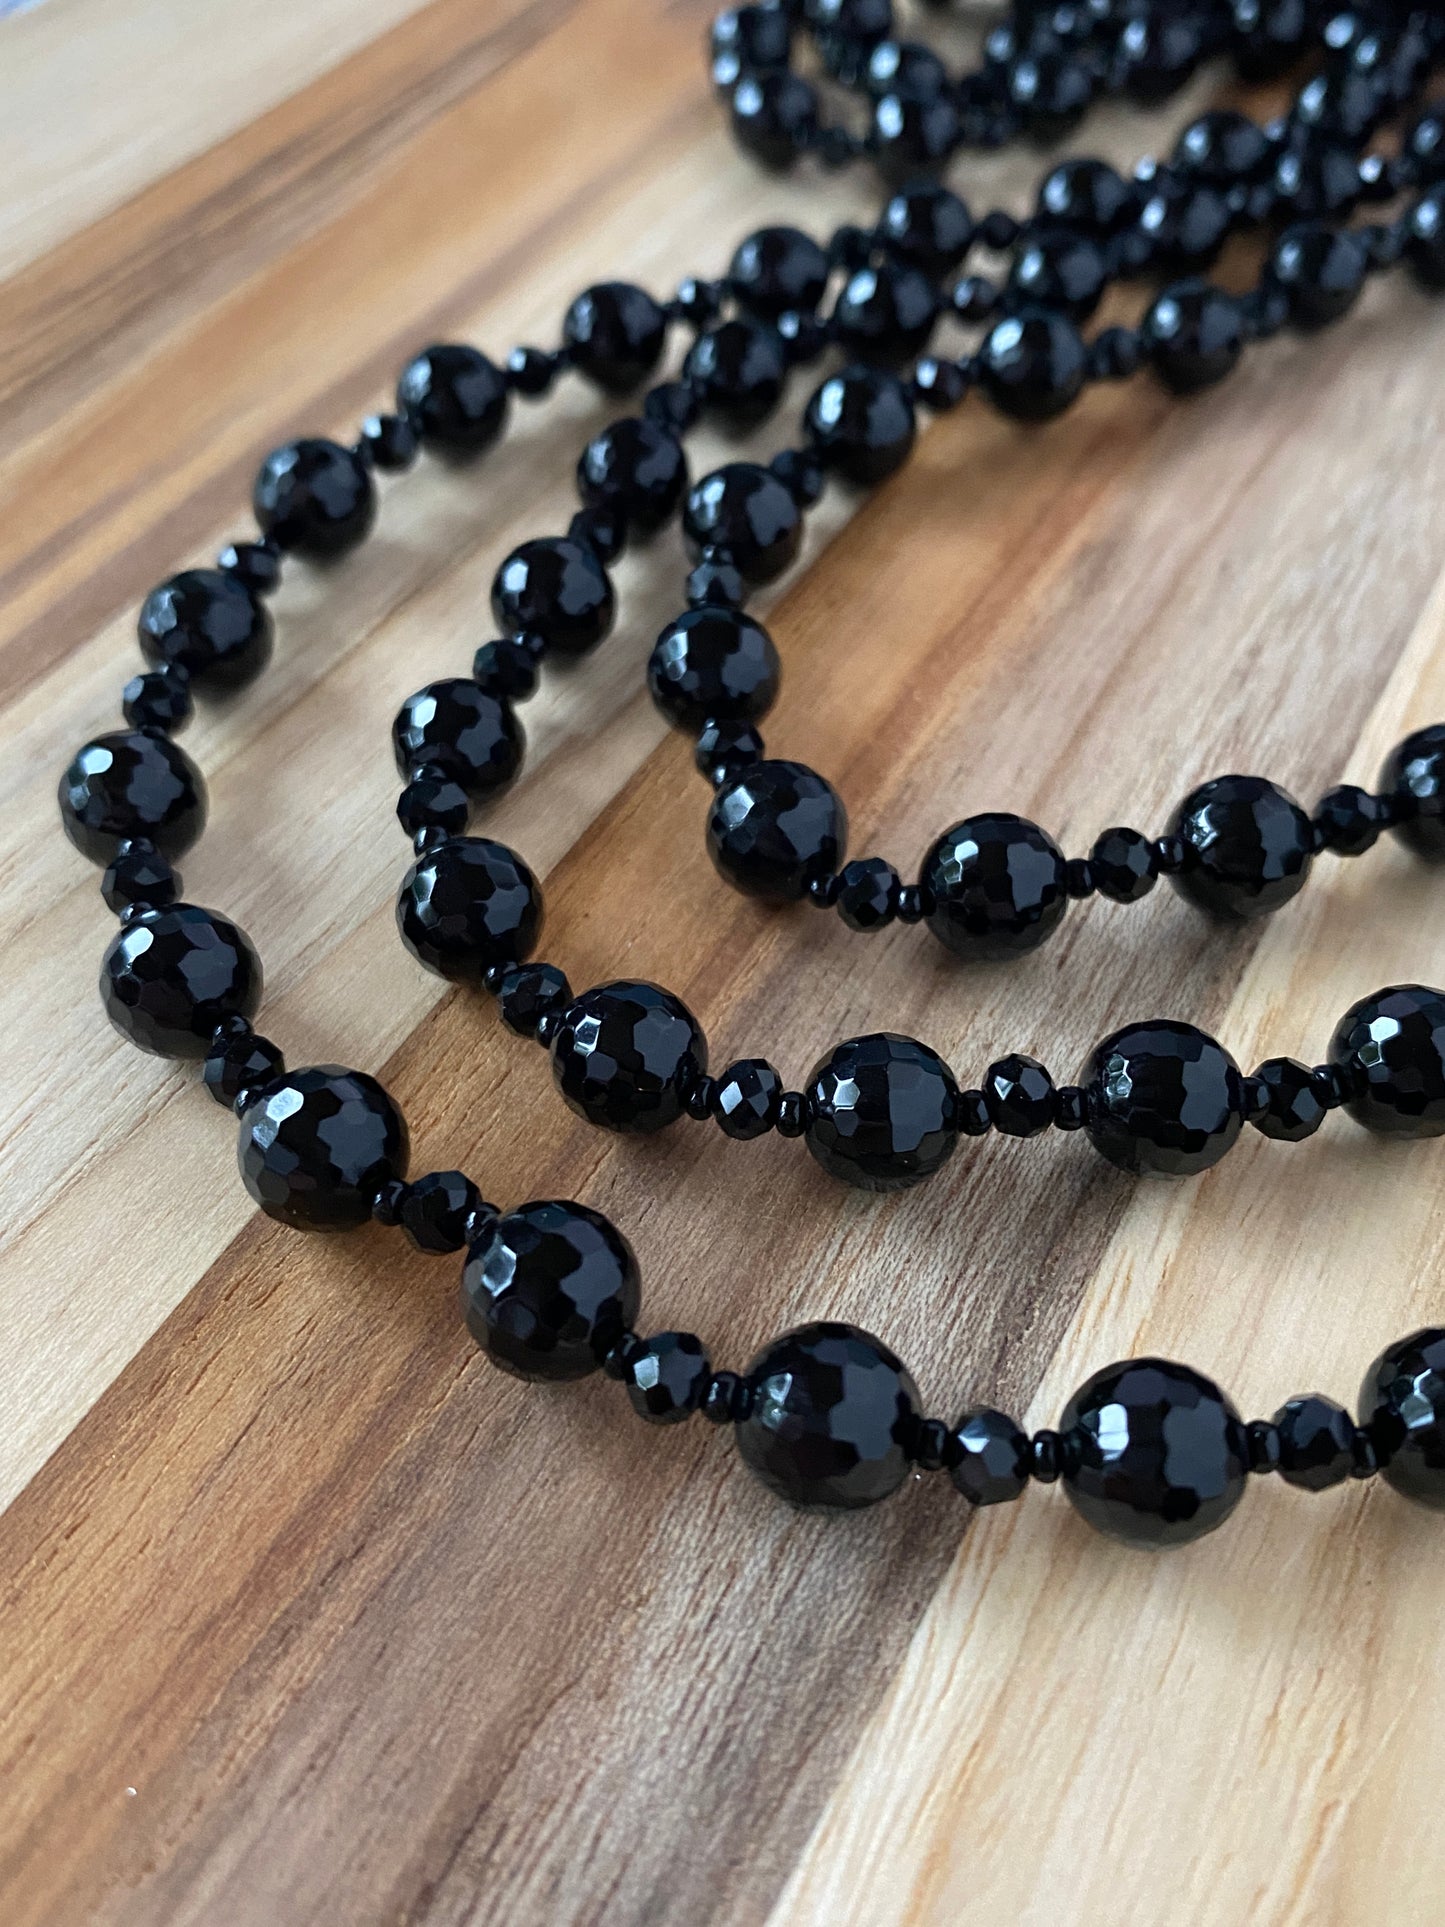 60" Extra Long Wraparound Faceted Black Onyx Necklace with Crystal beads - My Urban Gems